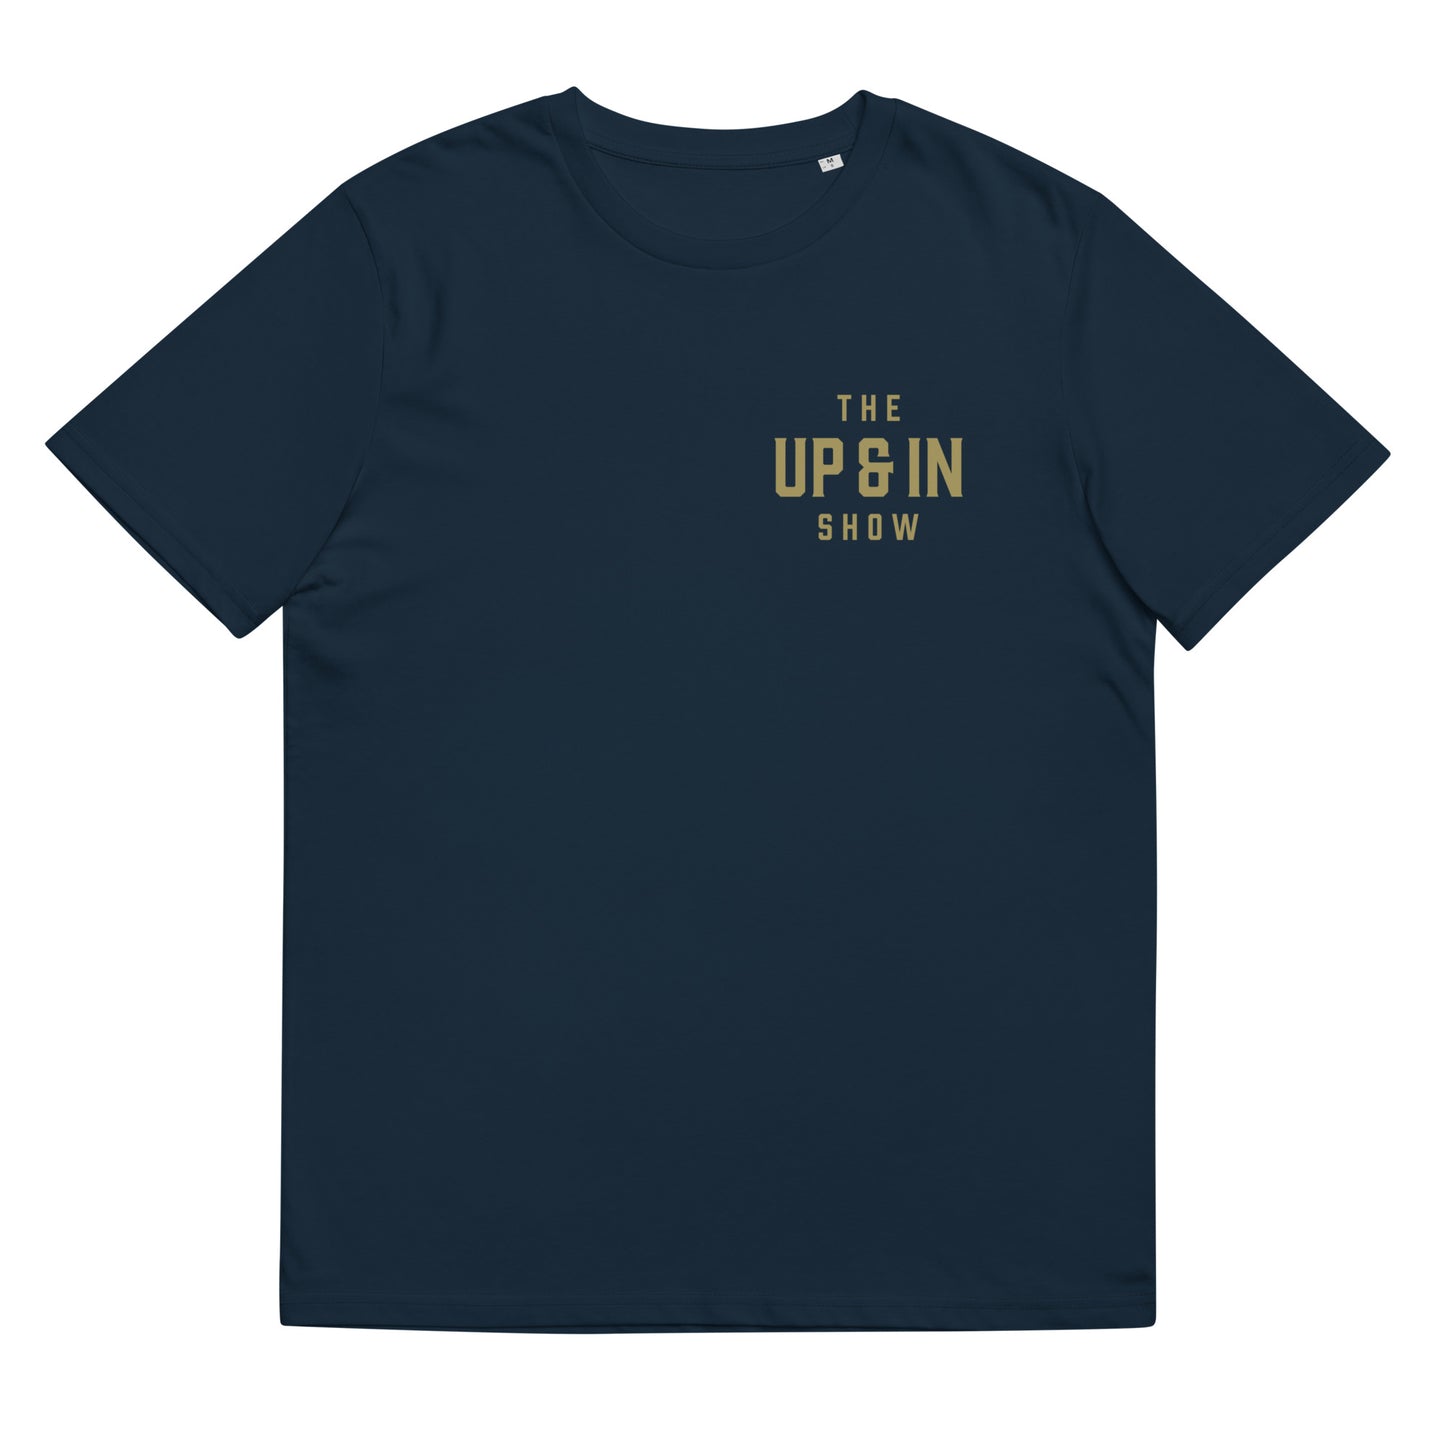 Up and In Corner Pocket Unisex organic cotton t-shirt